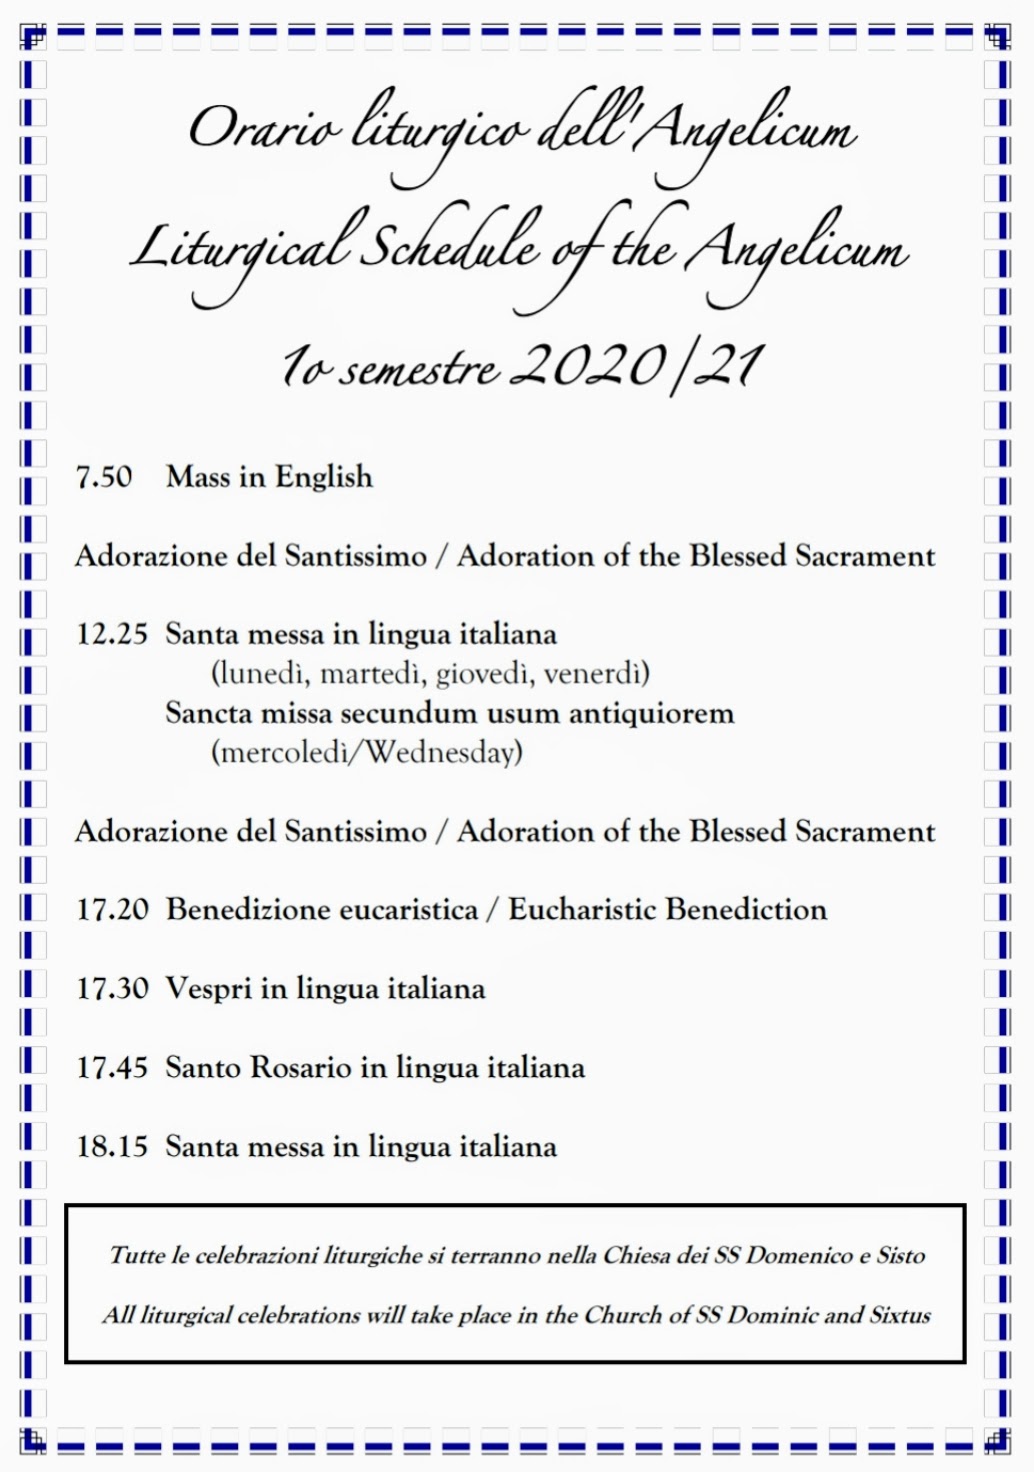 Liturgical Plan for the Fall Semester 2020 Angelicum